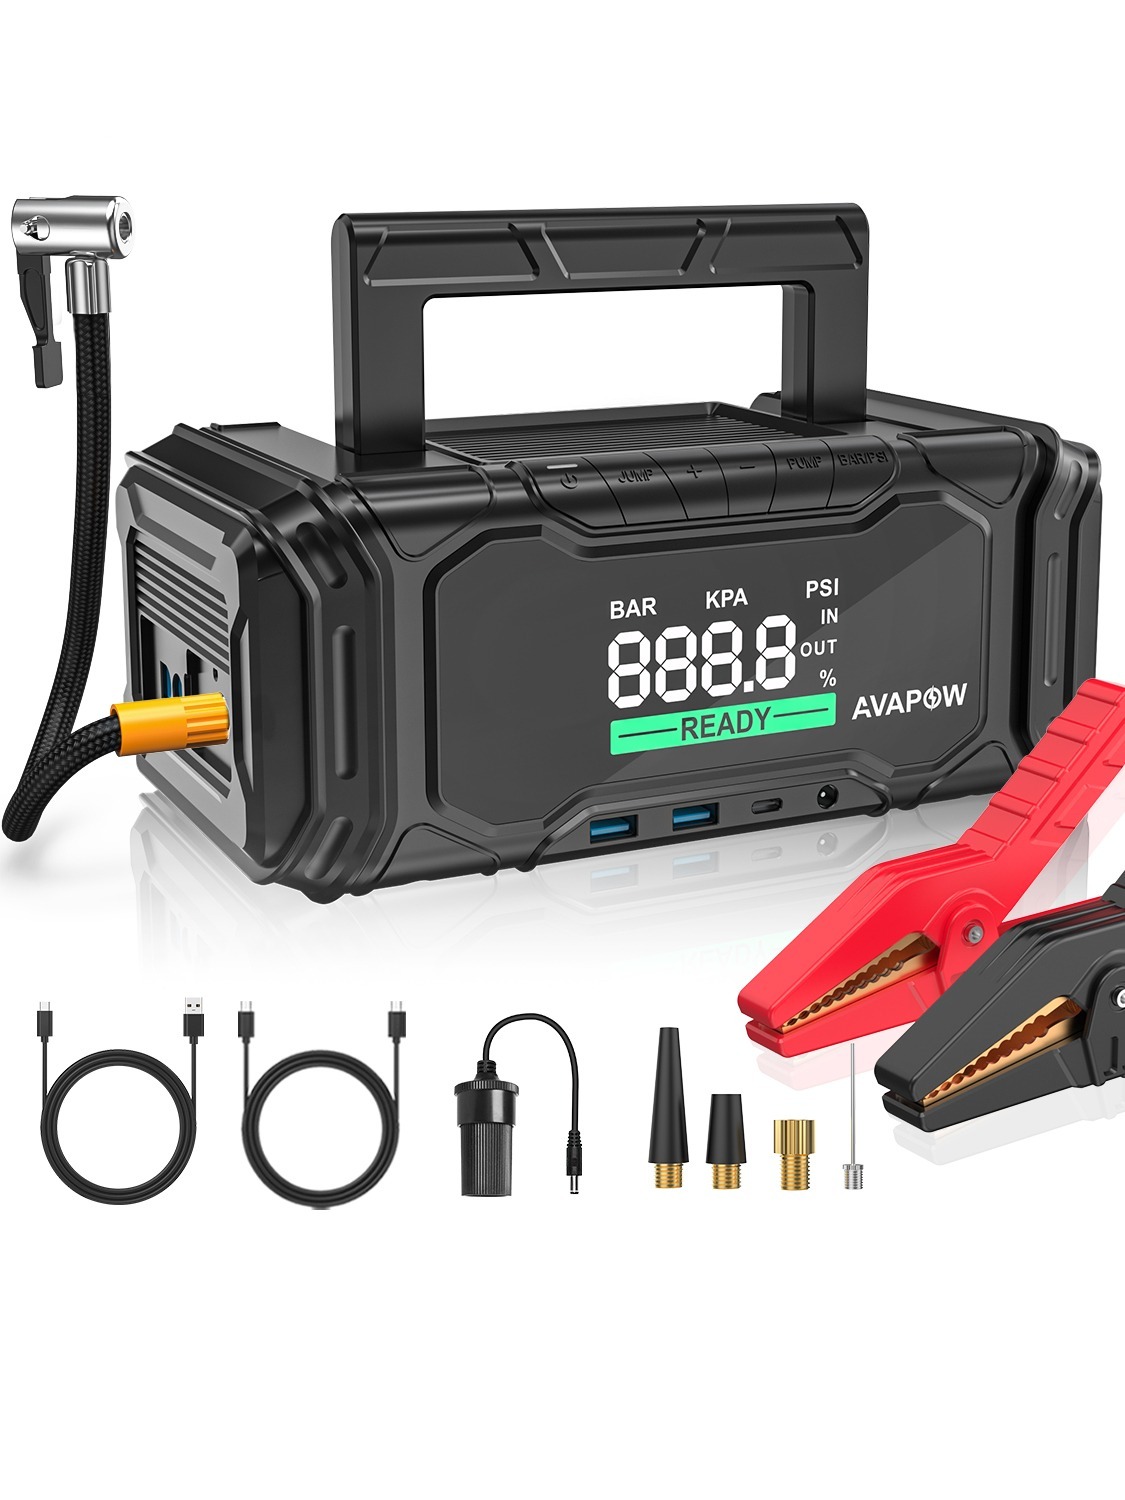 Prime Members: 12V AVAPOW 3000A Peak Car Battery Jump Starter w/ 150PSI Air Compressor (up to 8L Gas & Diesel Engine) $60 + FS